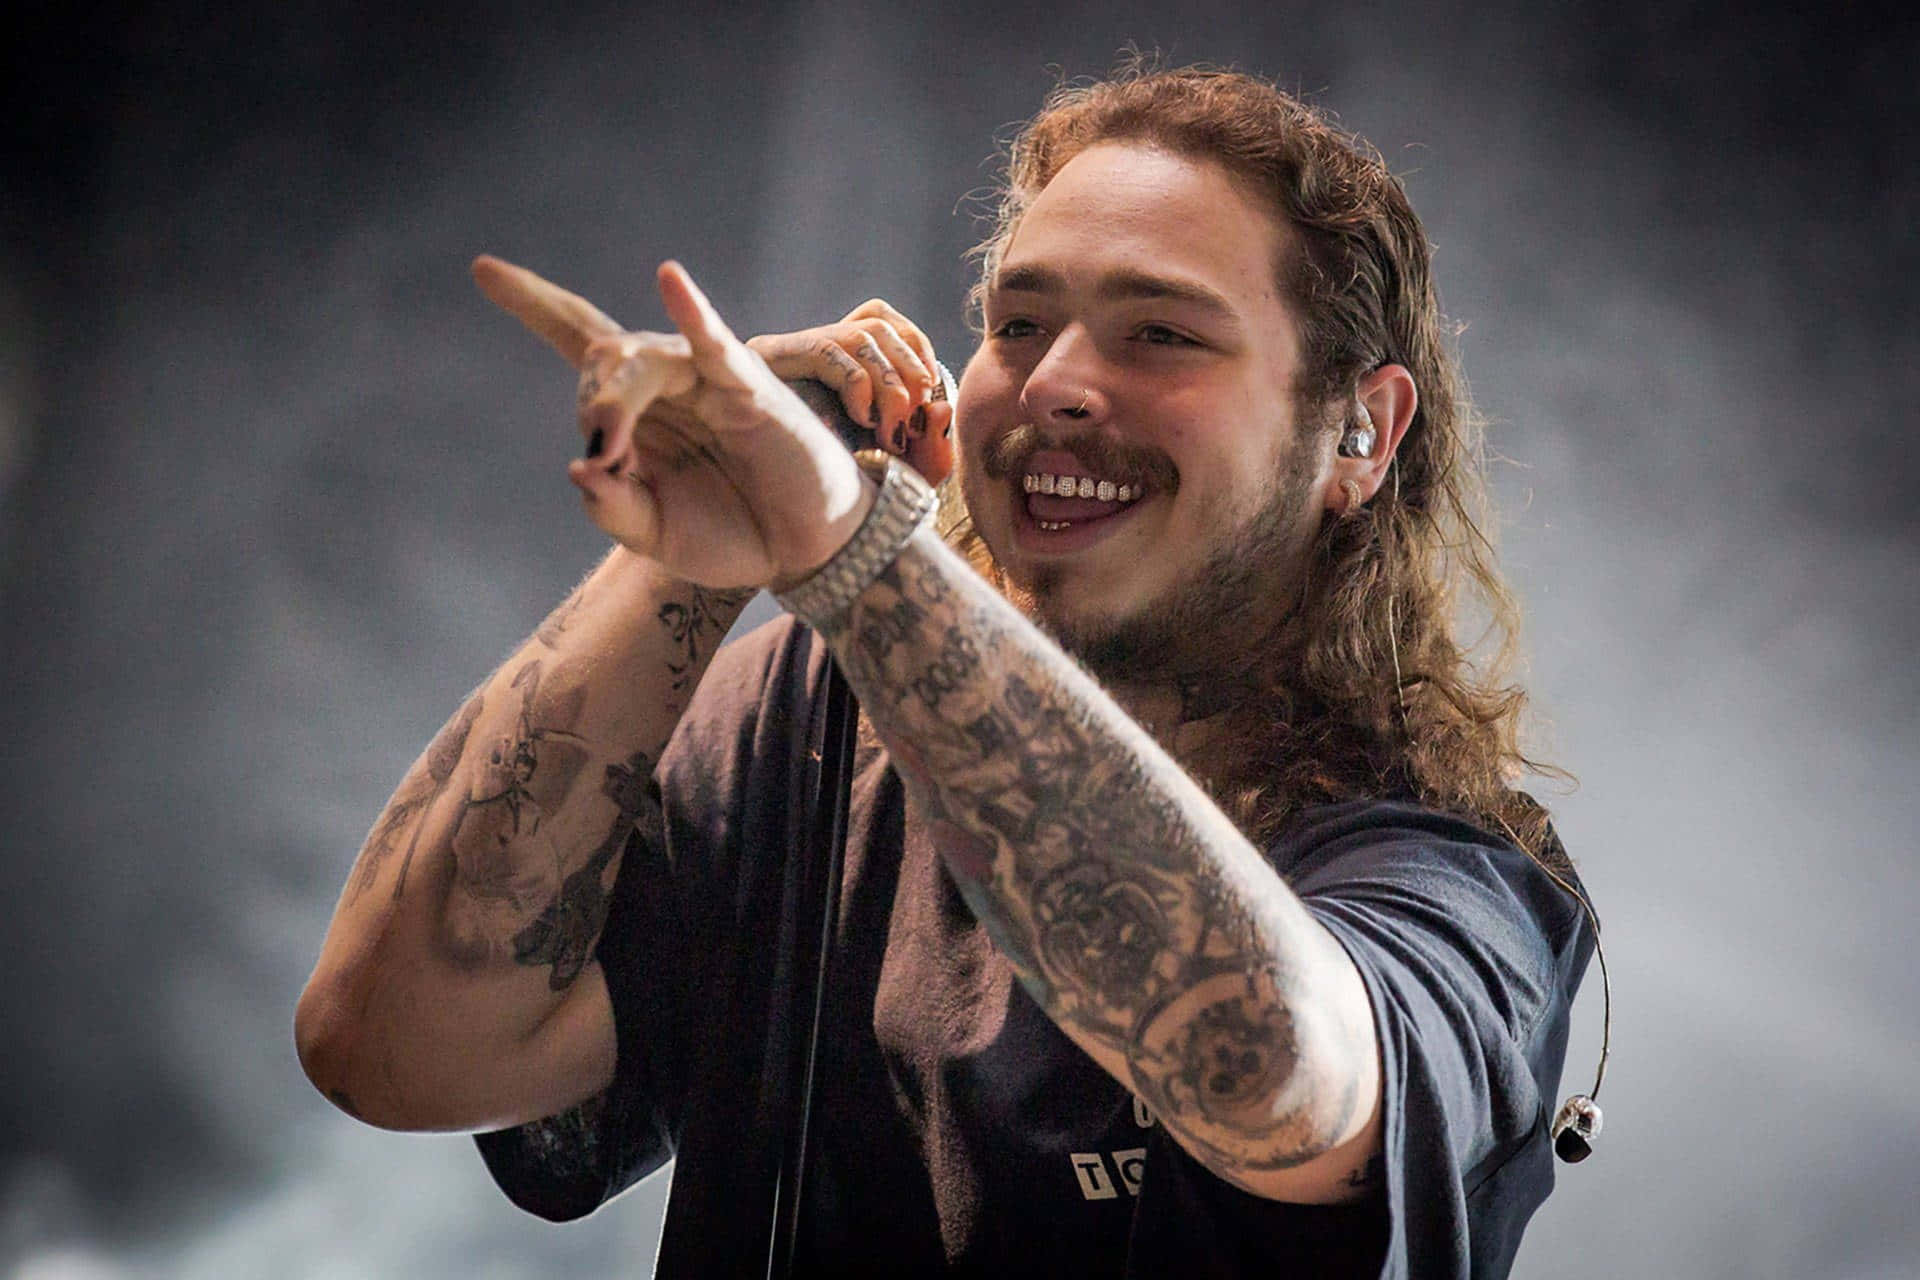 Post Malone Performing on Stage